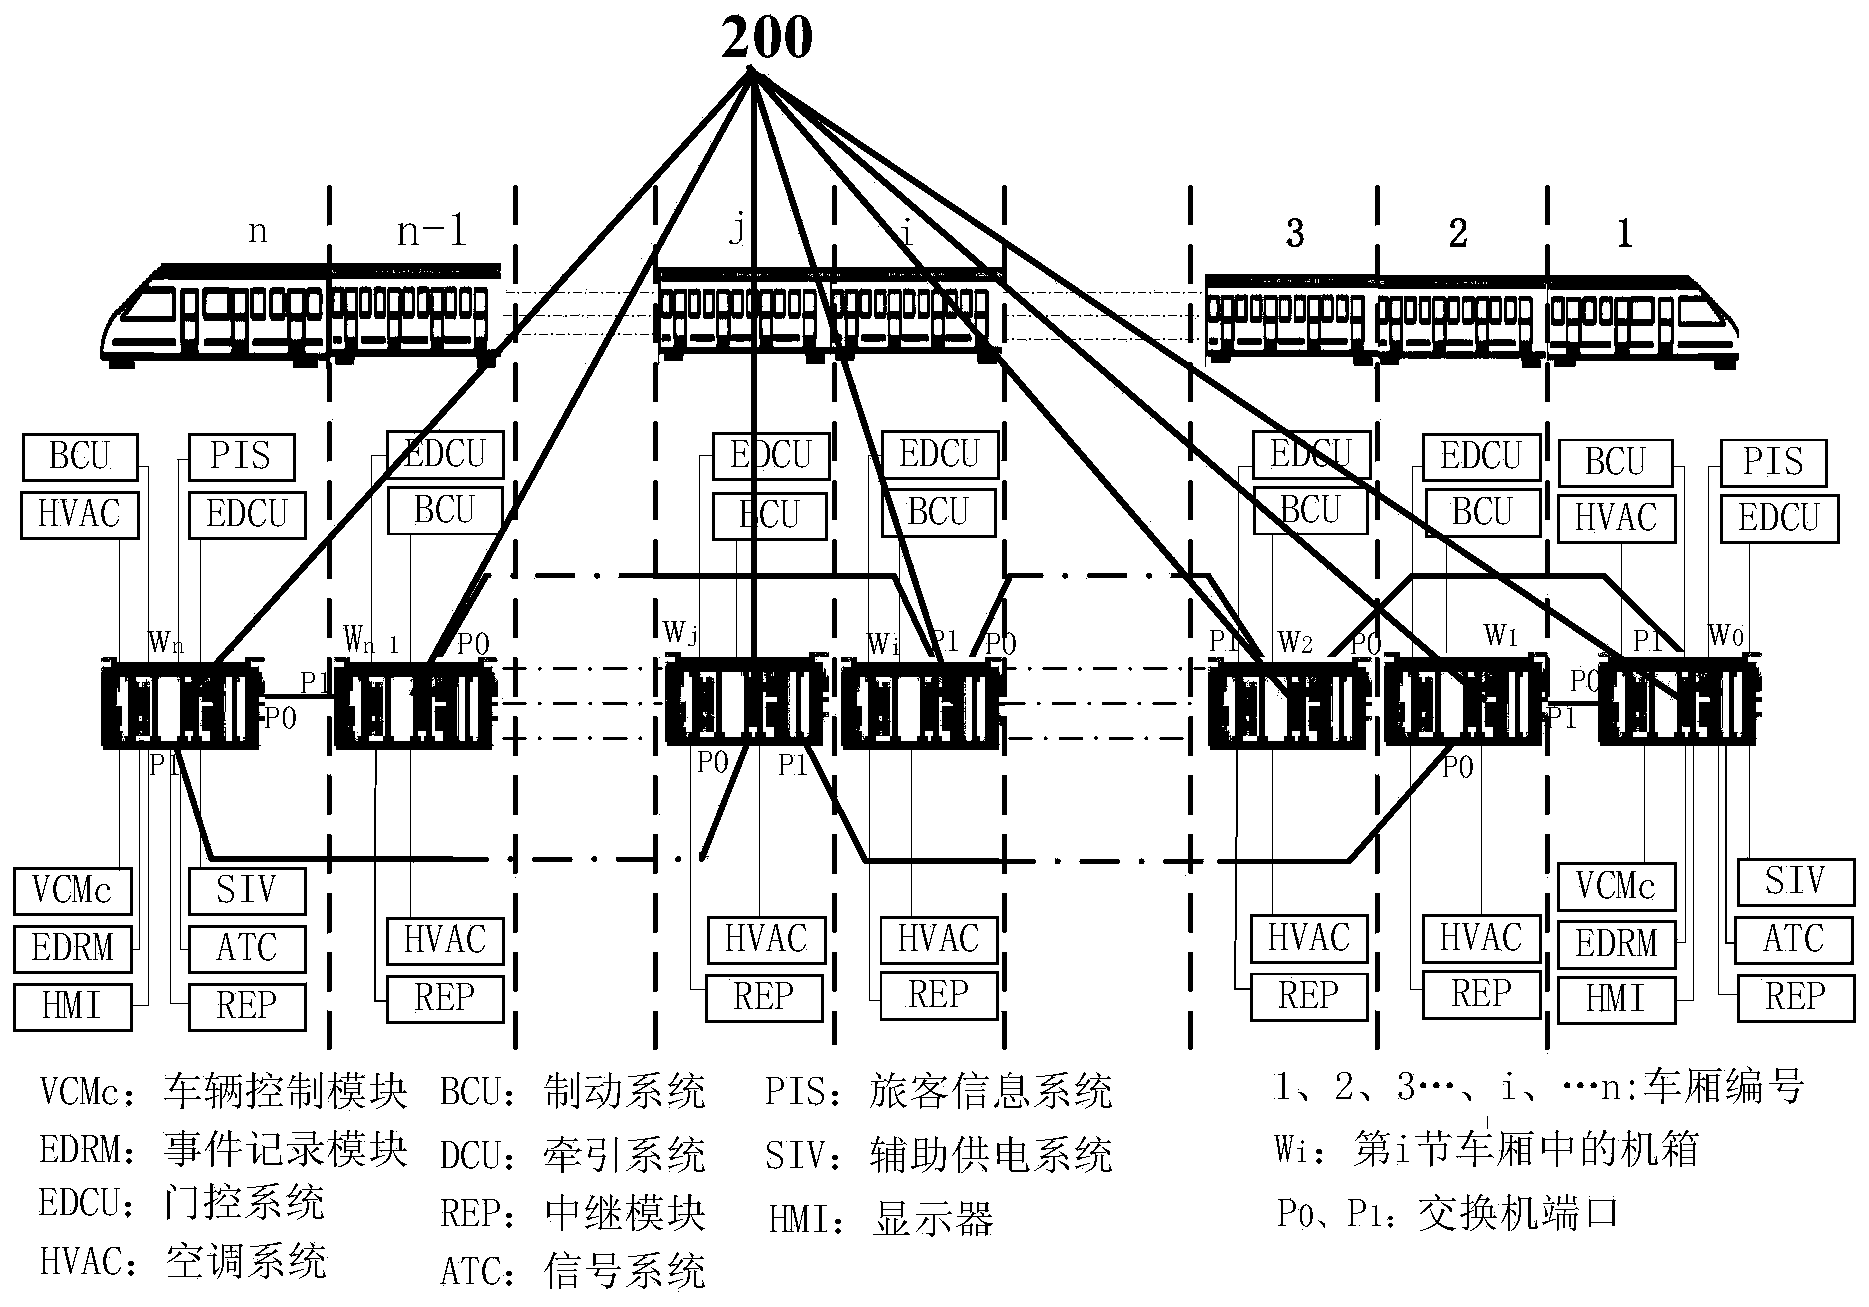 Train communication network switching device and system based on Ethernet